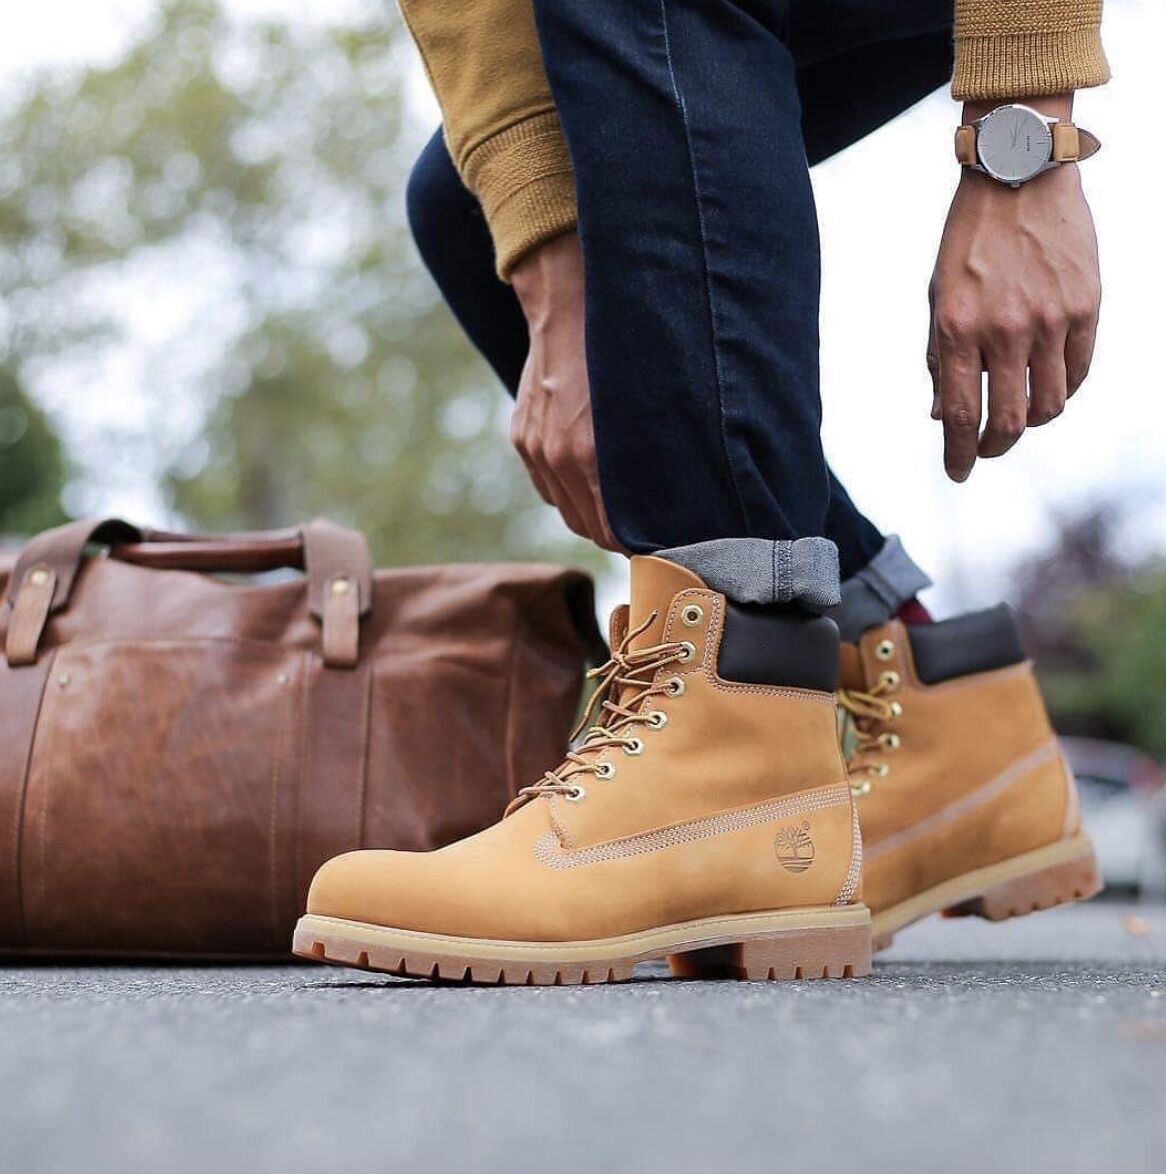 Man leaning down fixing Timberland boots